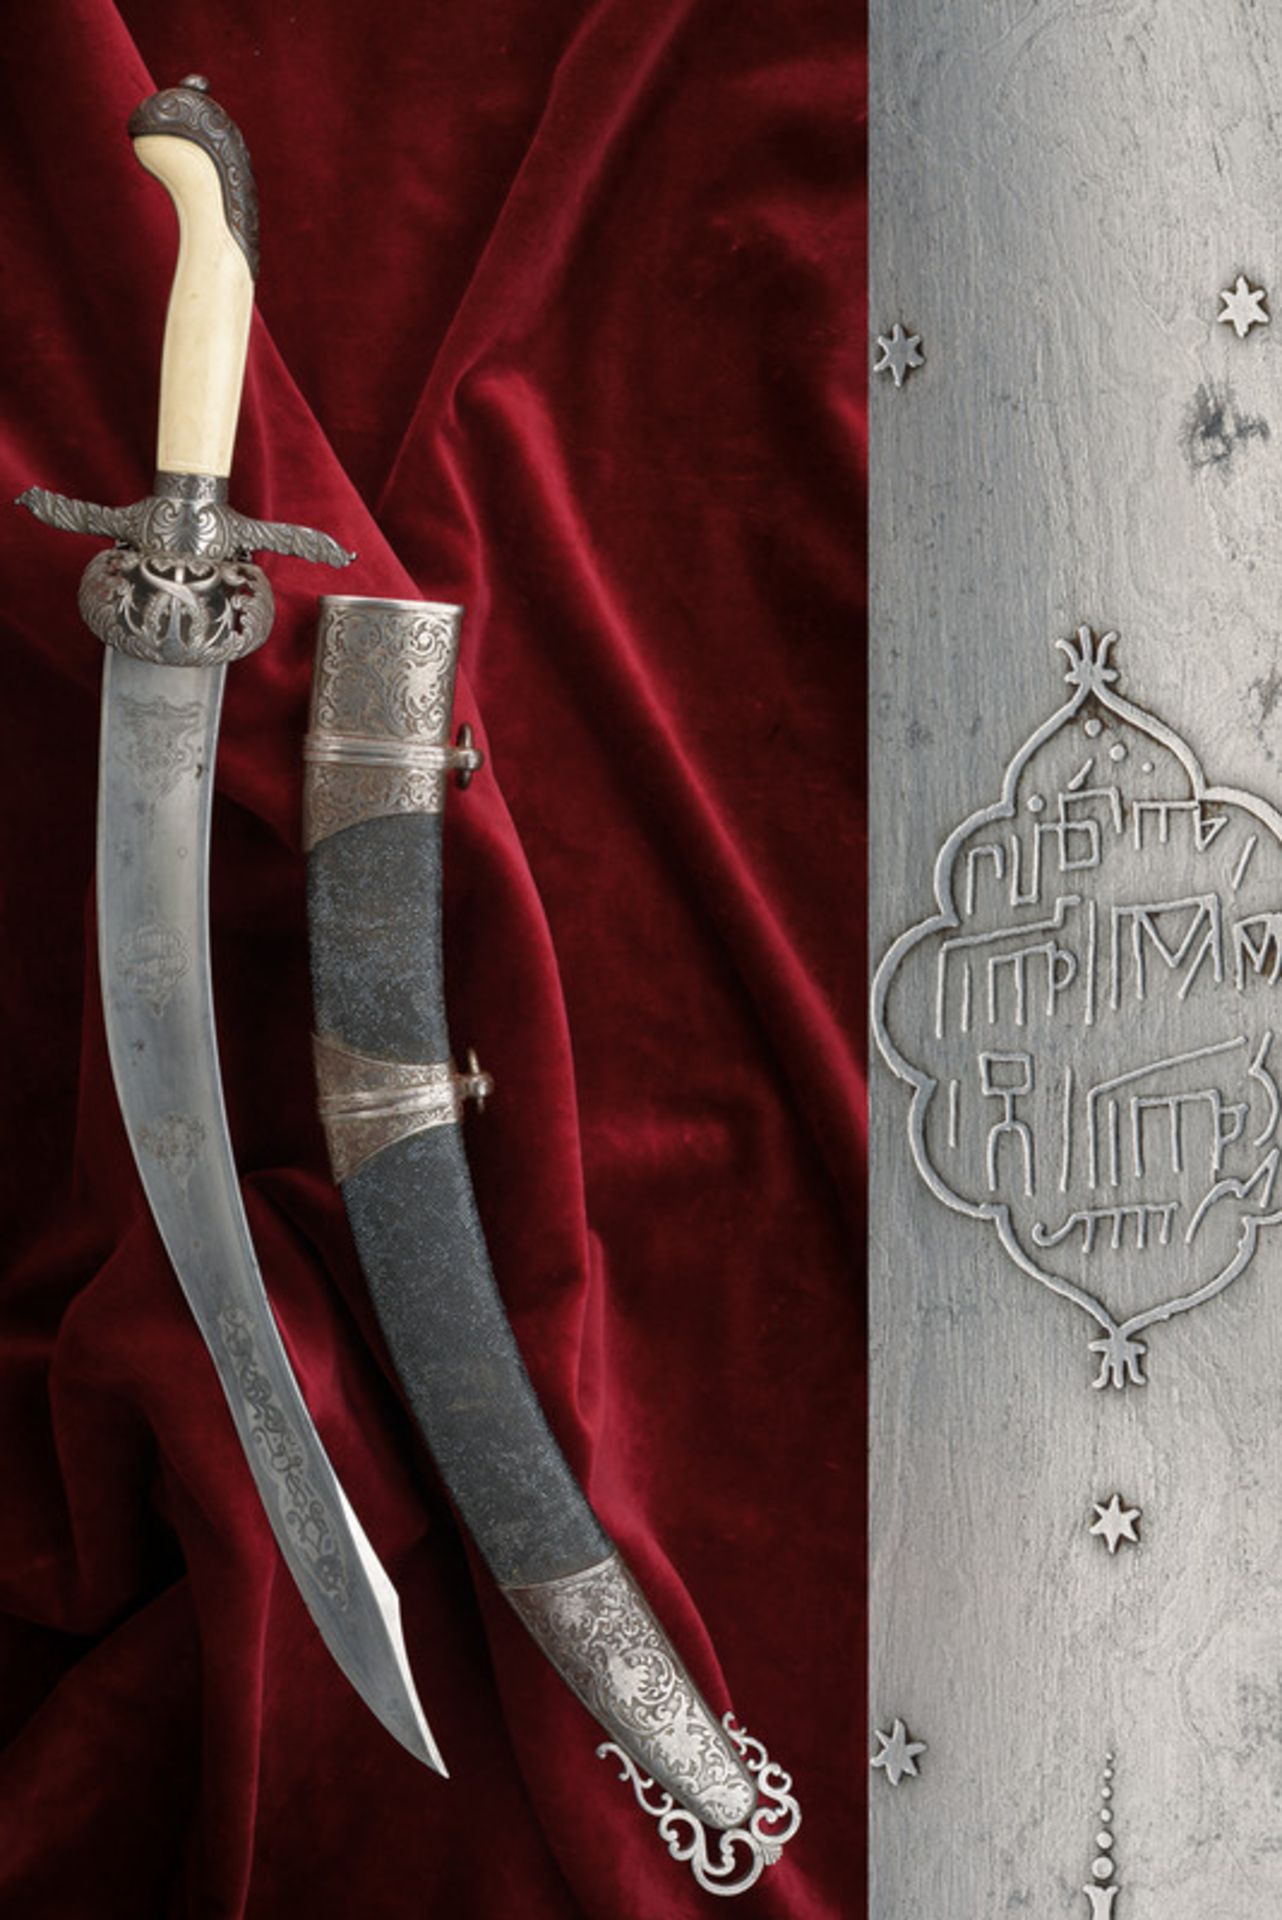 An outstanding honor dagger from the property of Augusto Riboty